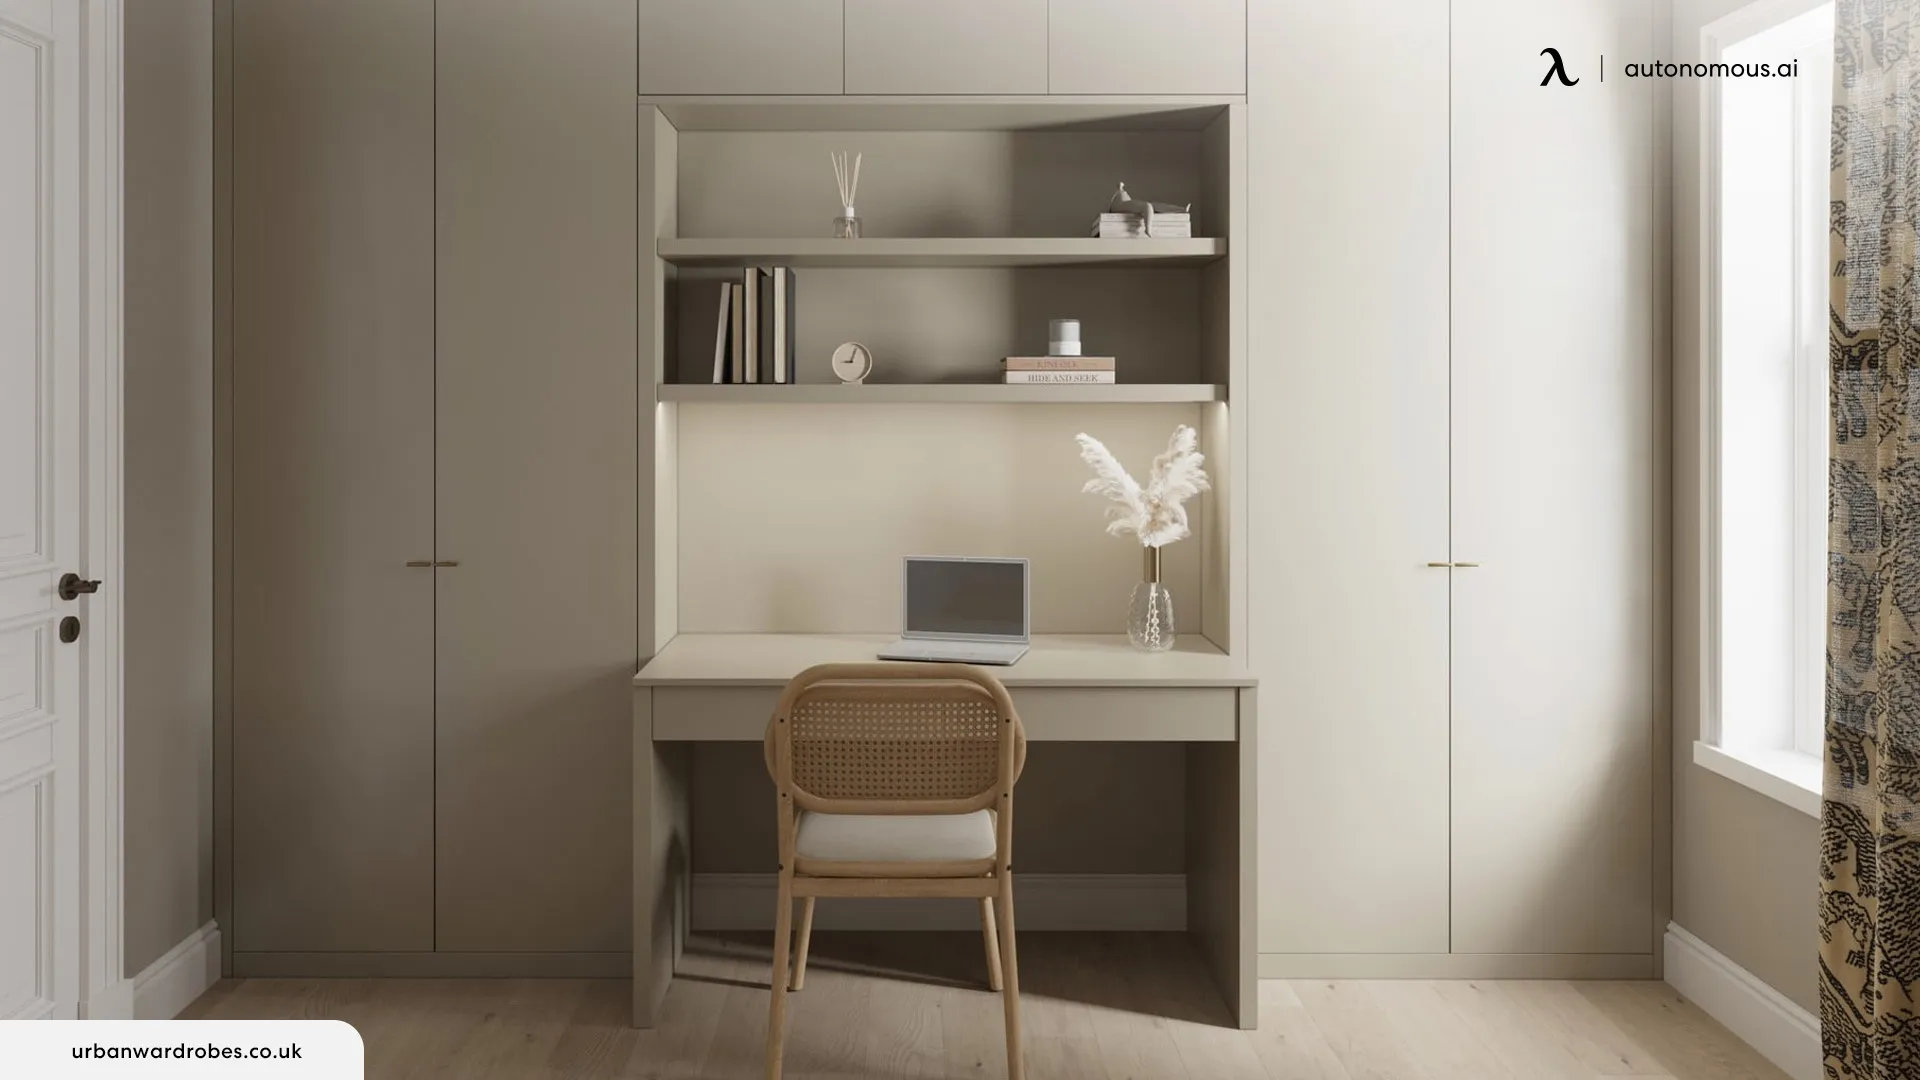 Dressers or Wardrobes with Built-in Desks or Work Surfaces